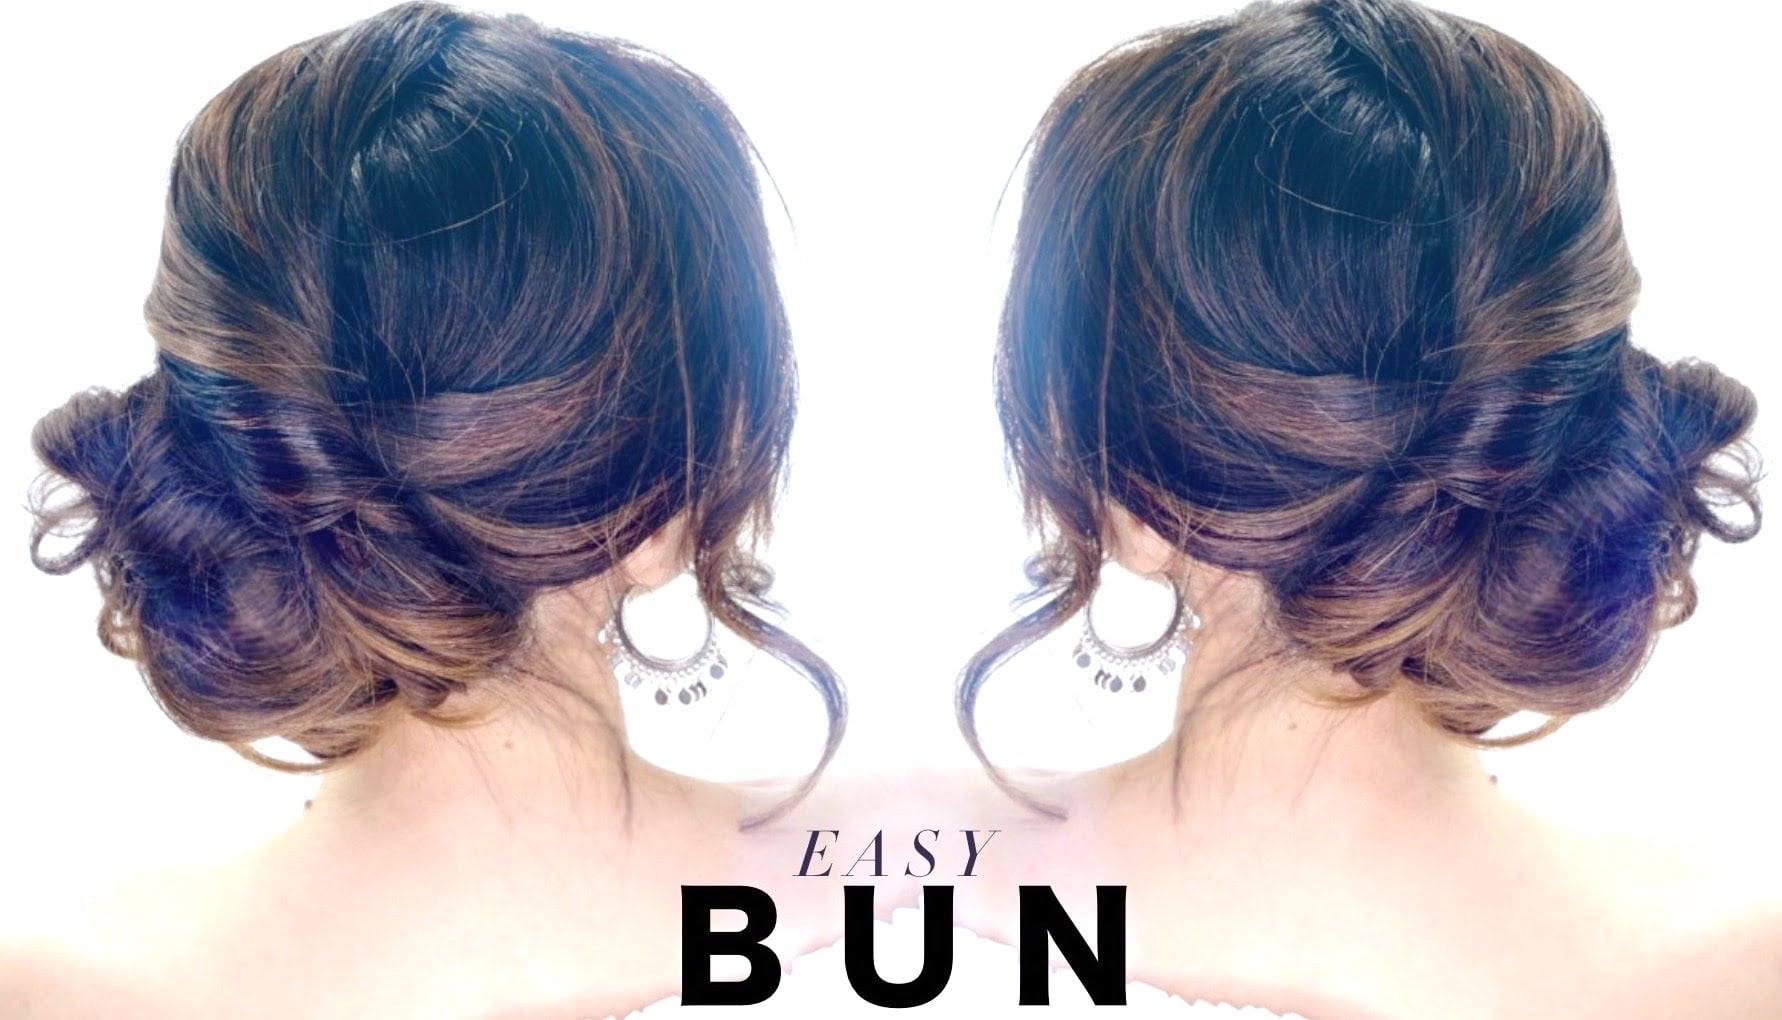 Effortless Side Bun Updo Hairstyle | 16 Easy Updo Hairstyles to Try at Home  | POPSUGAR Beauty